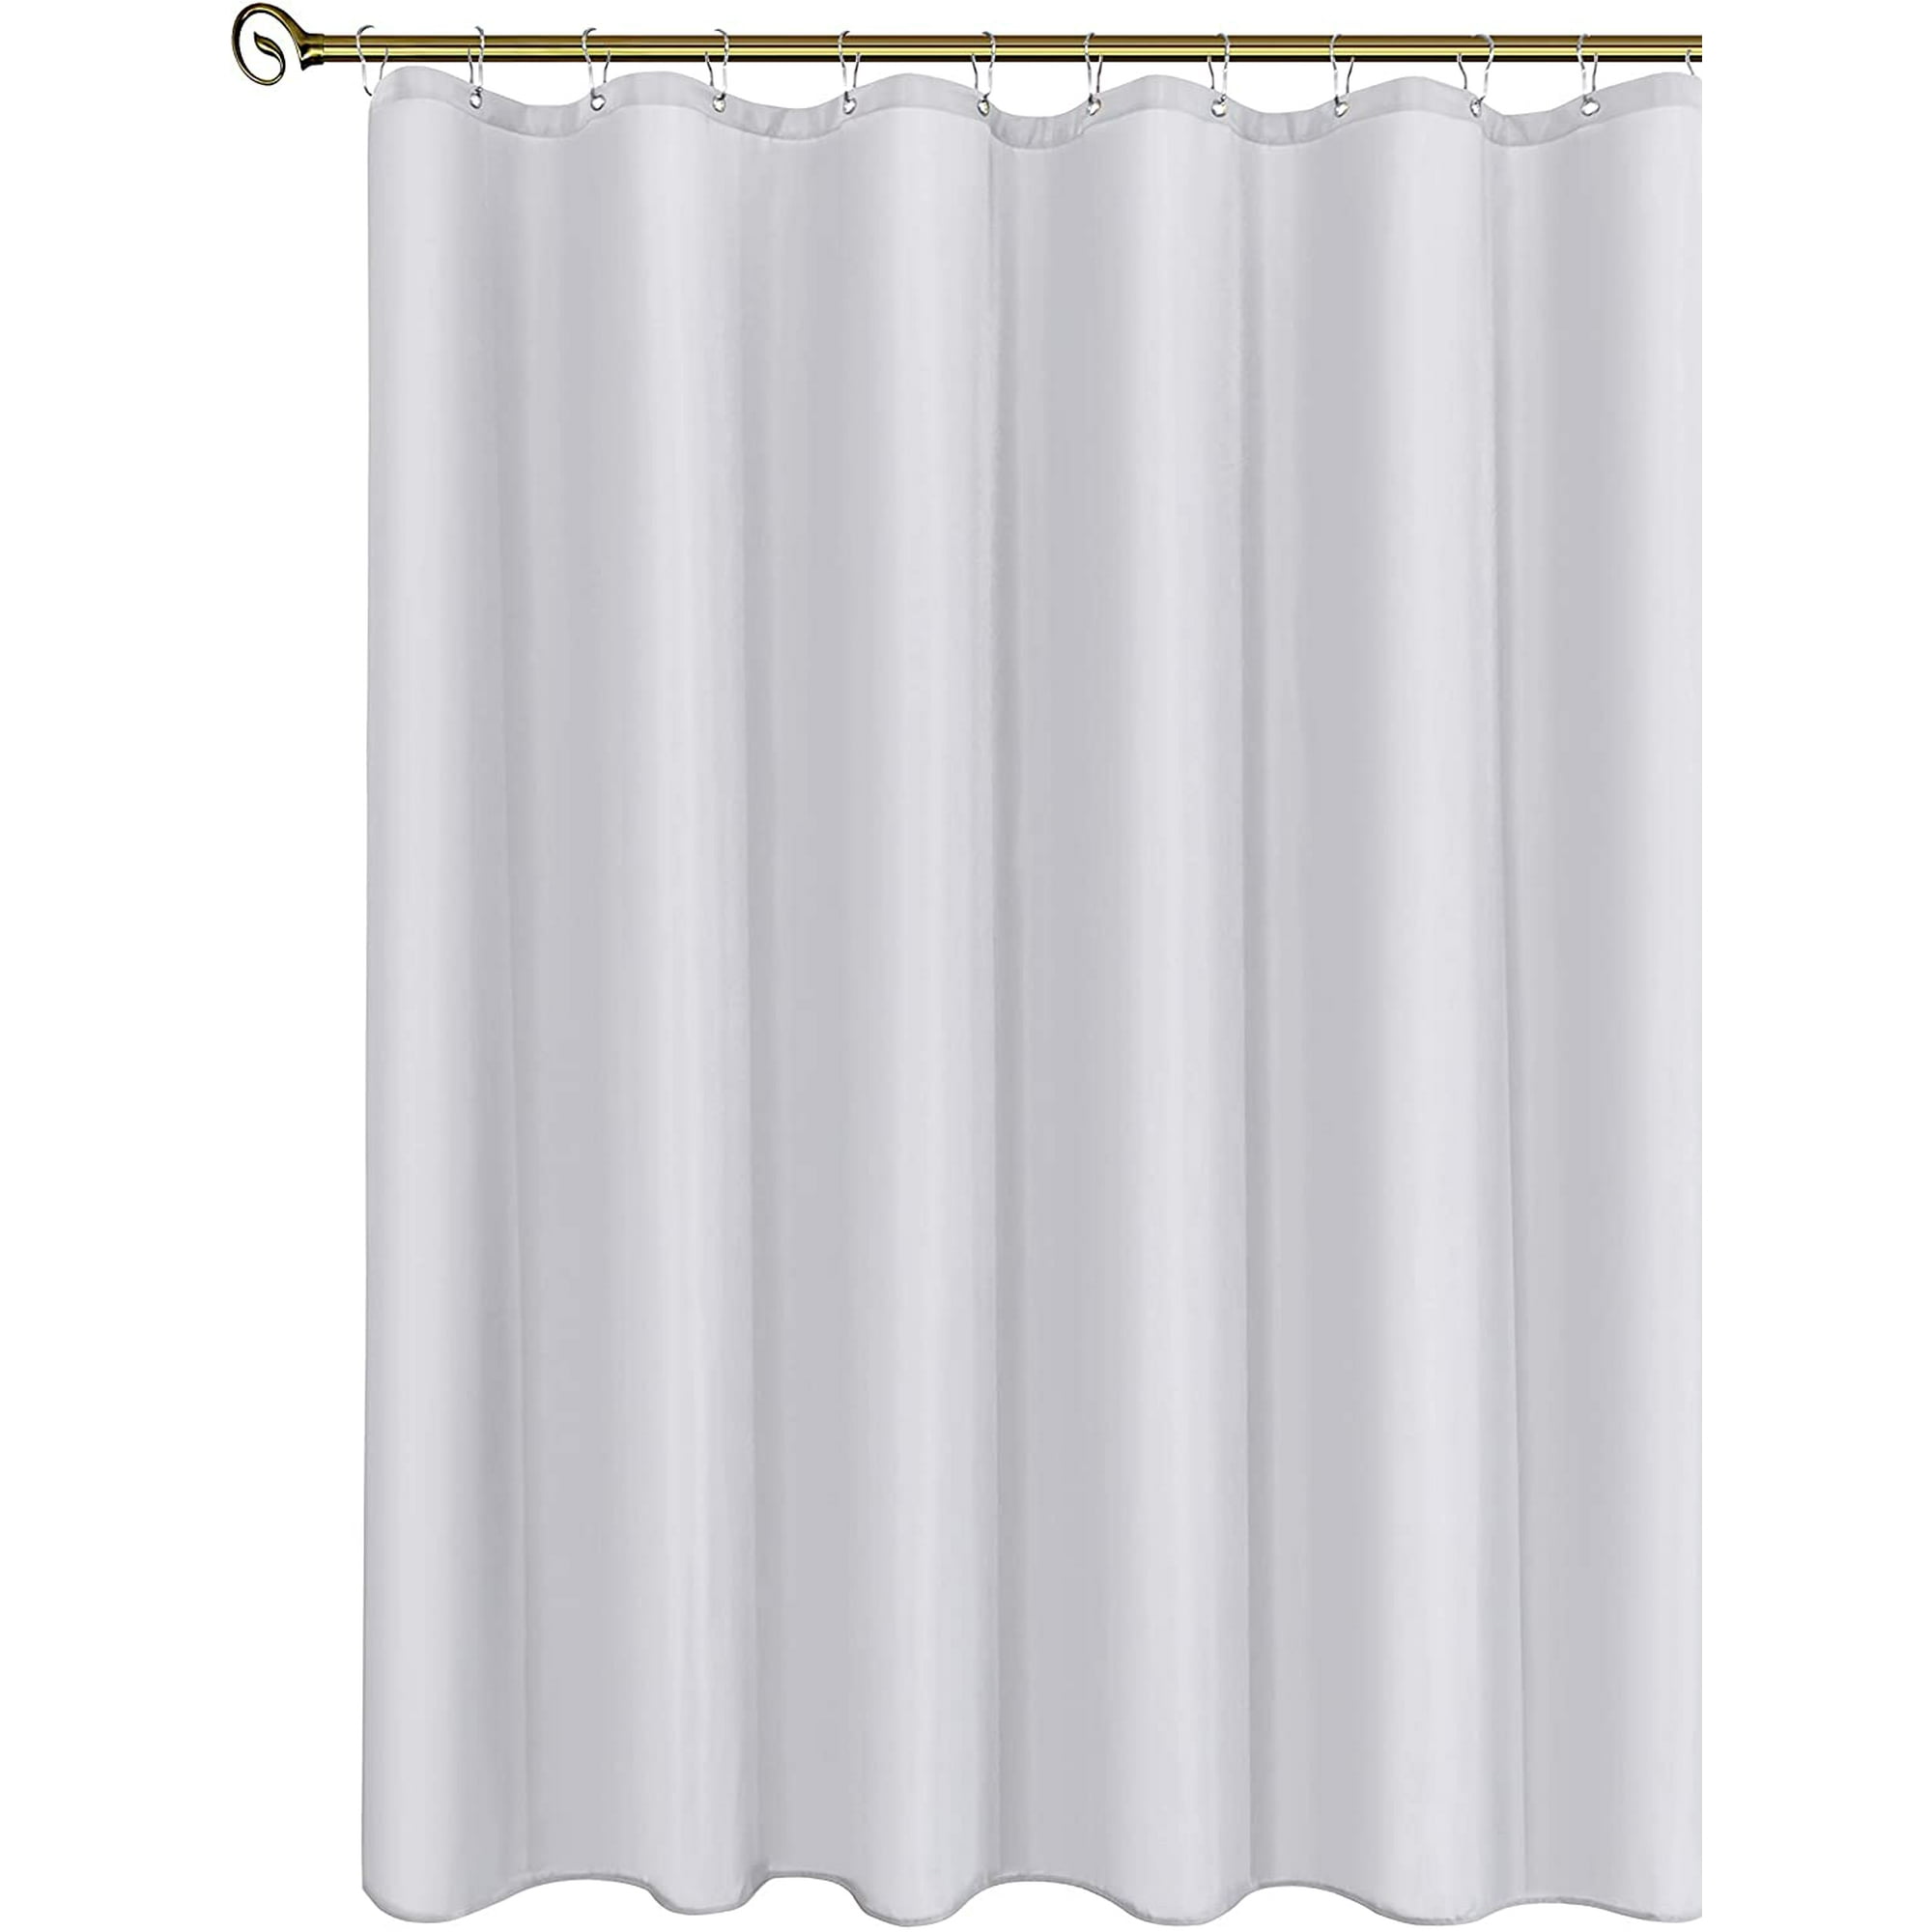 Fabric Shower Stall Curtain Liners, Are There Shower Curtains Longer Than 72